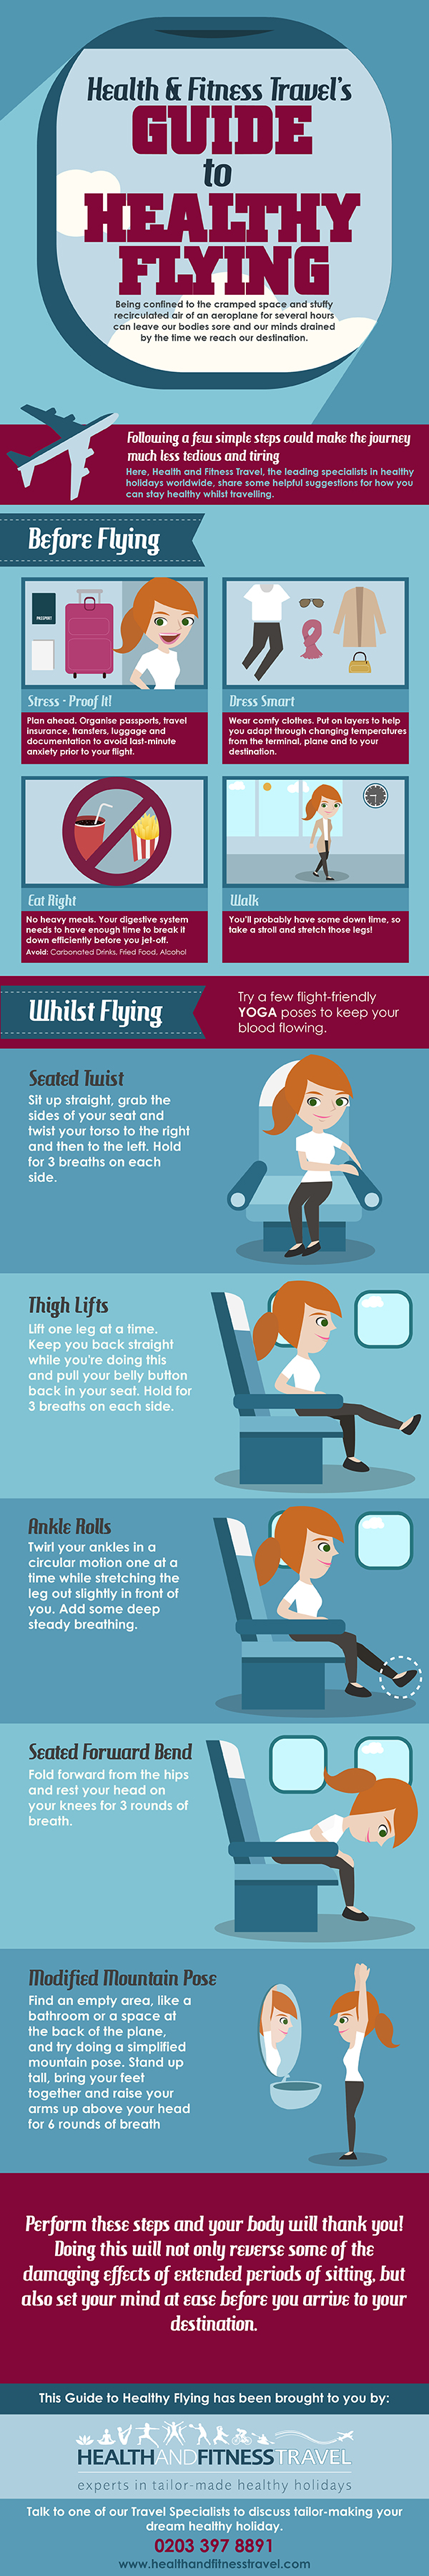 Healthy Flying Infographic